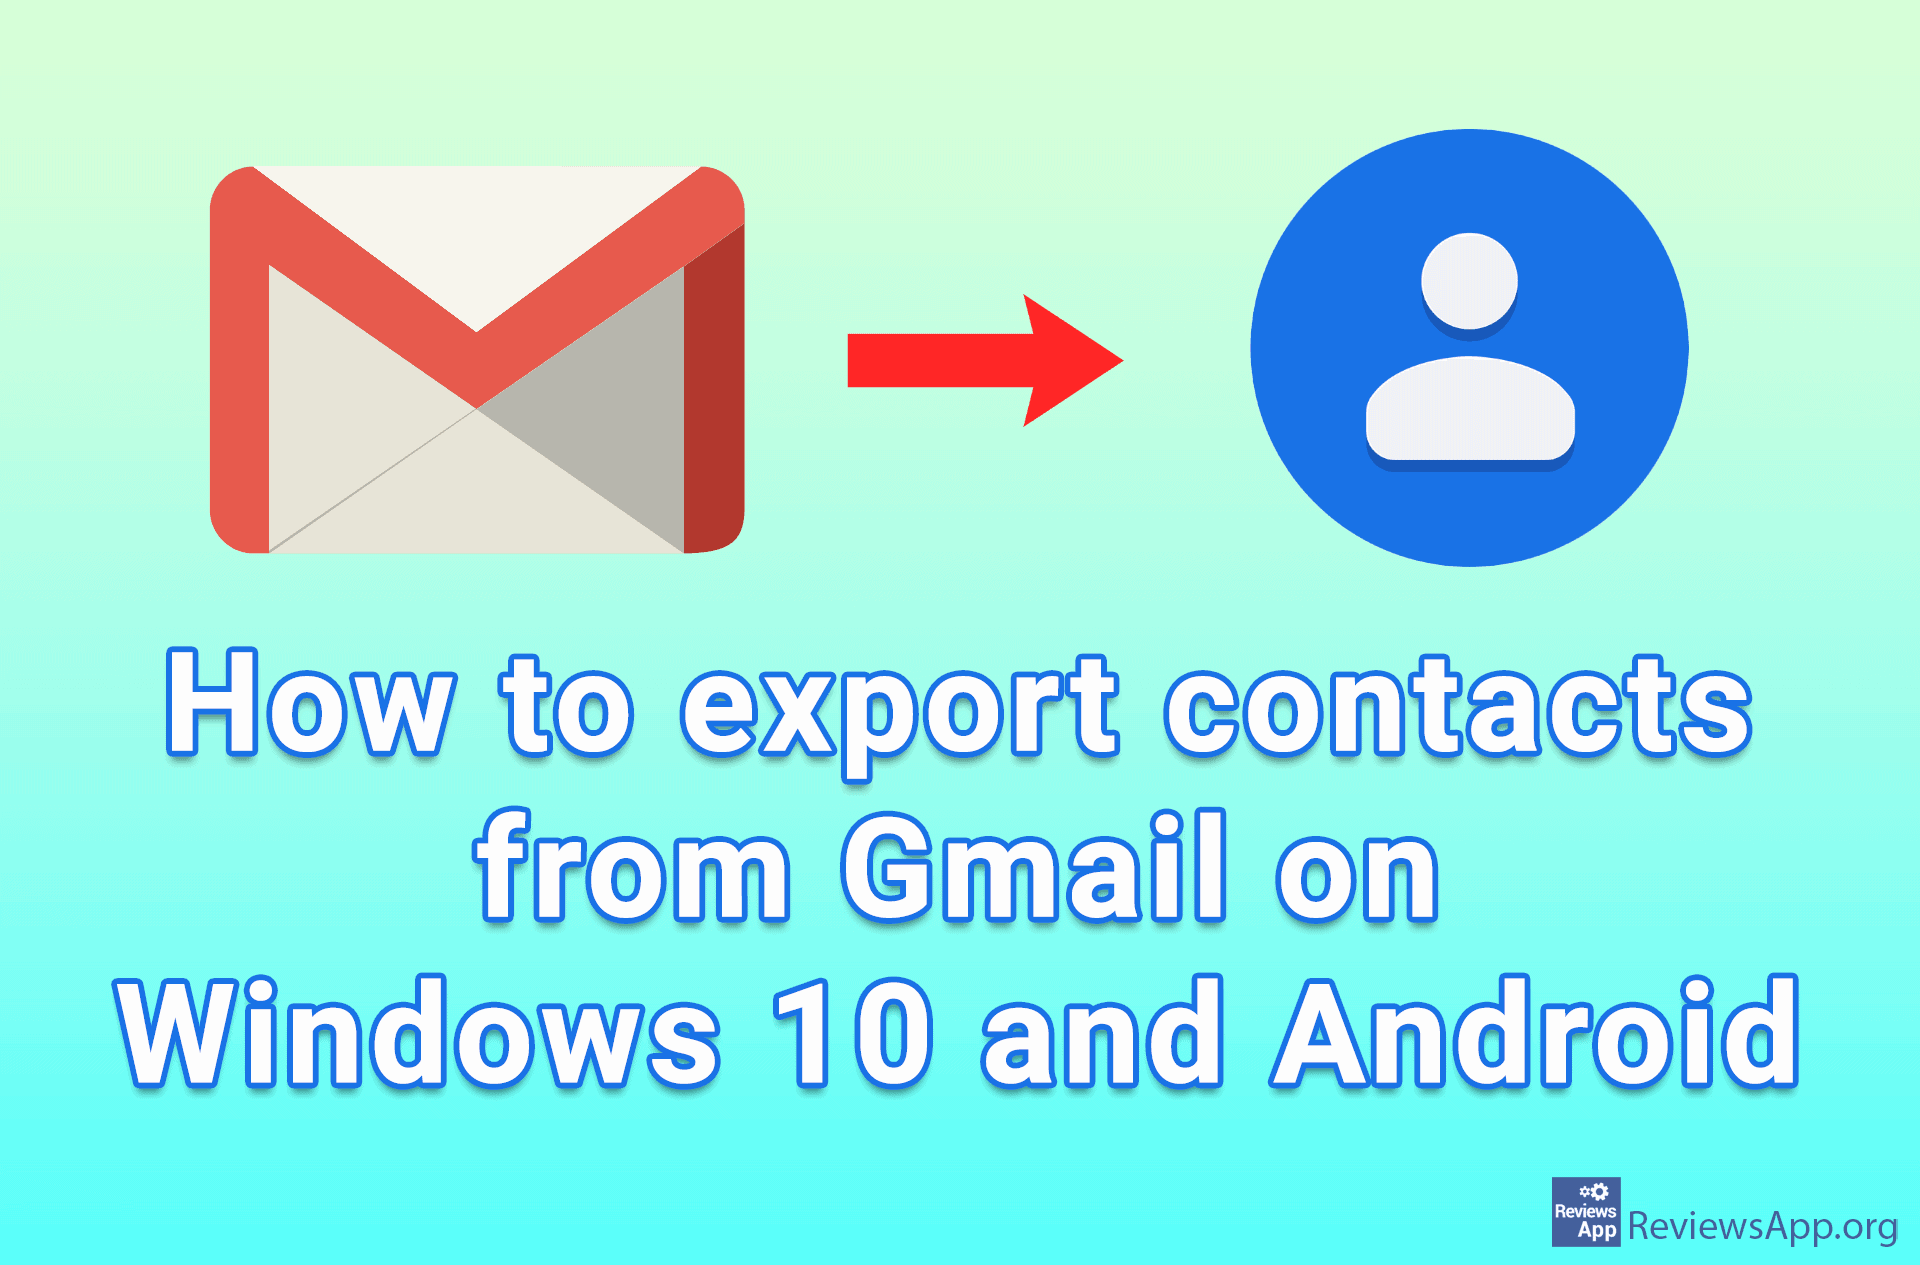 How to export contacts from Gmail on Windows 10 and Android